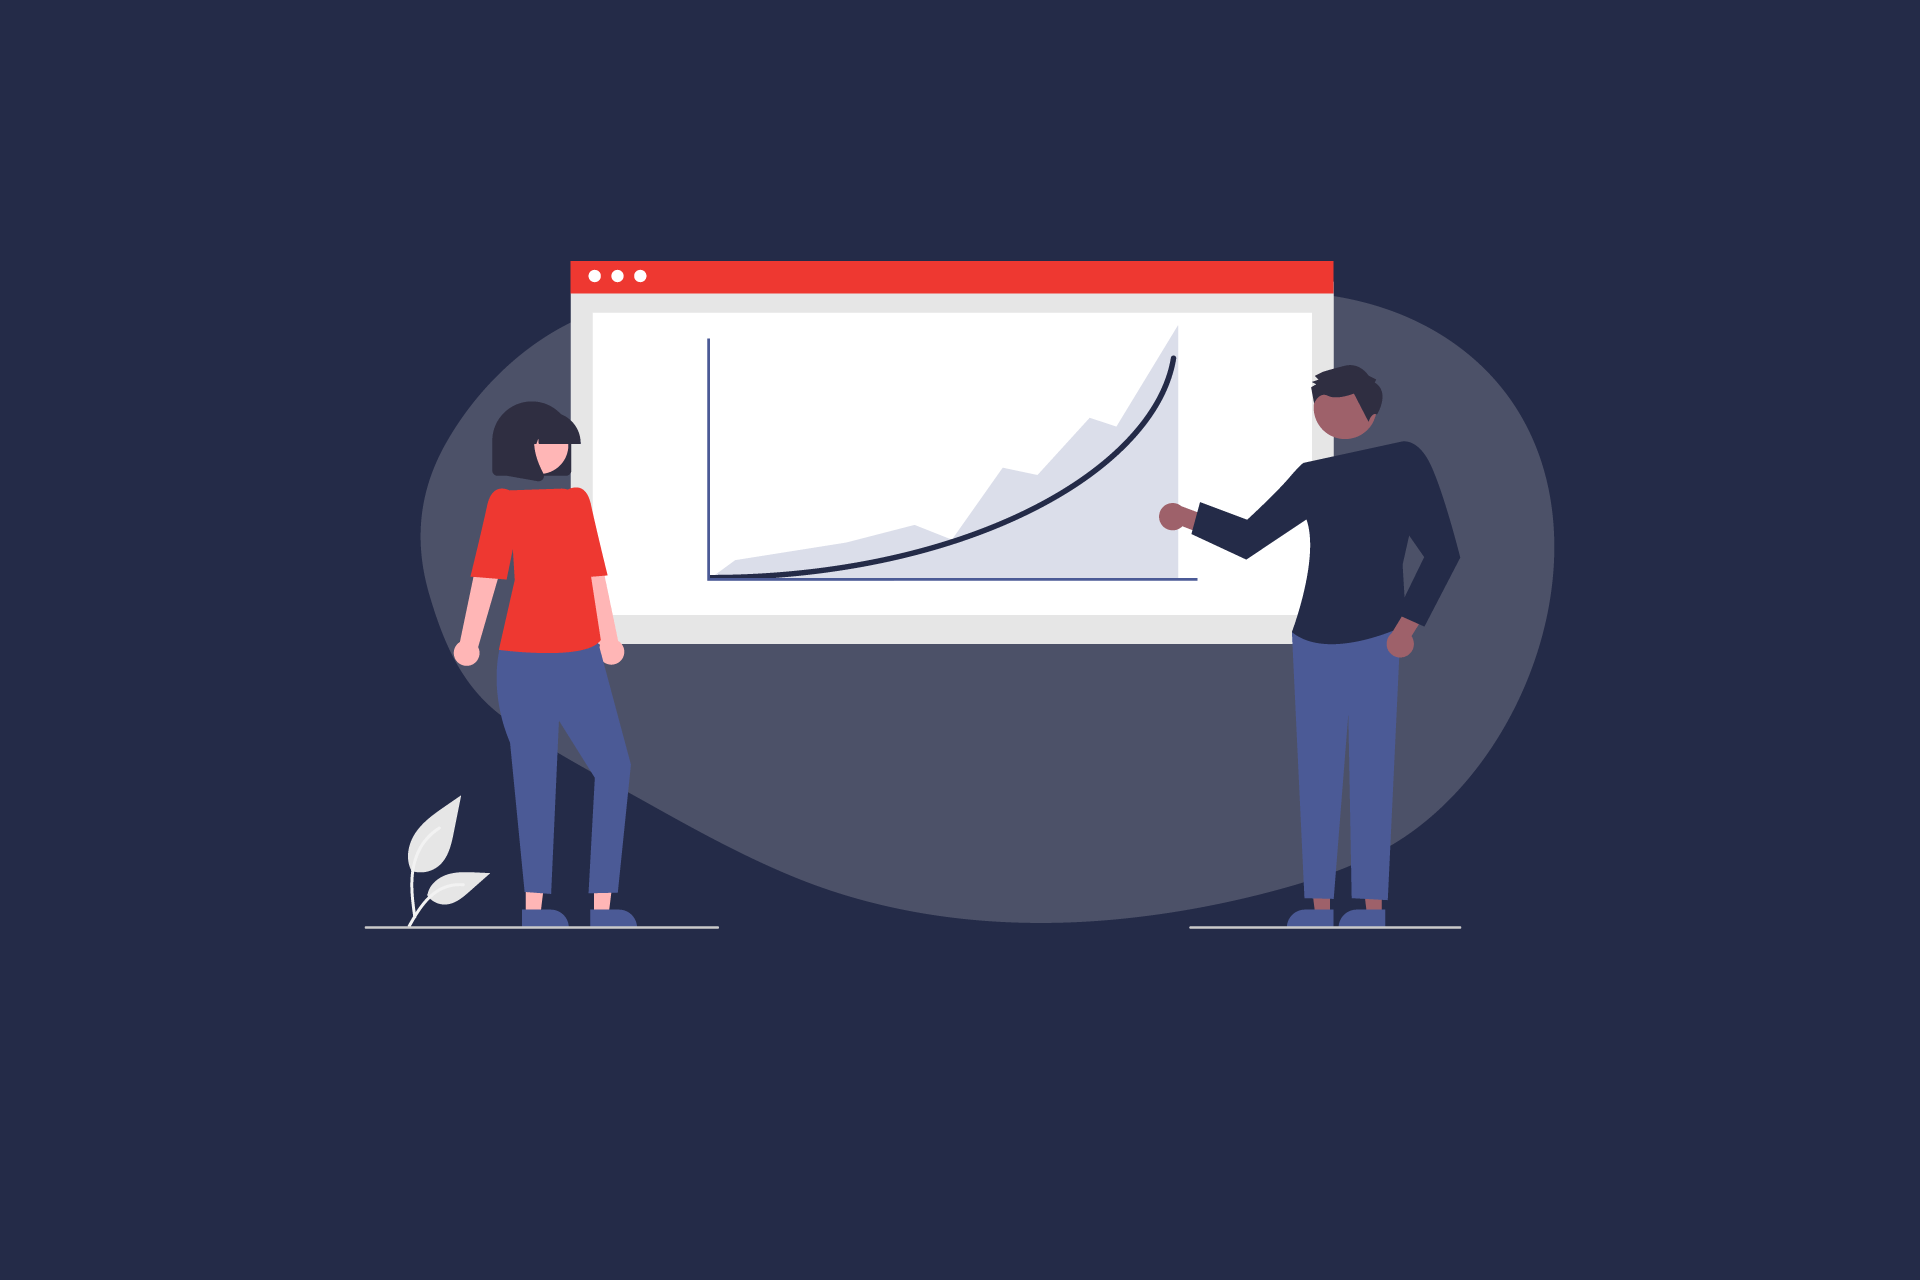 Illustration: 2 people in front of a graphic with a rising curve. | eggheads.net